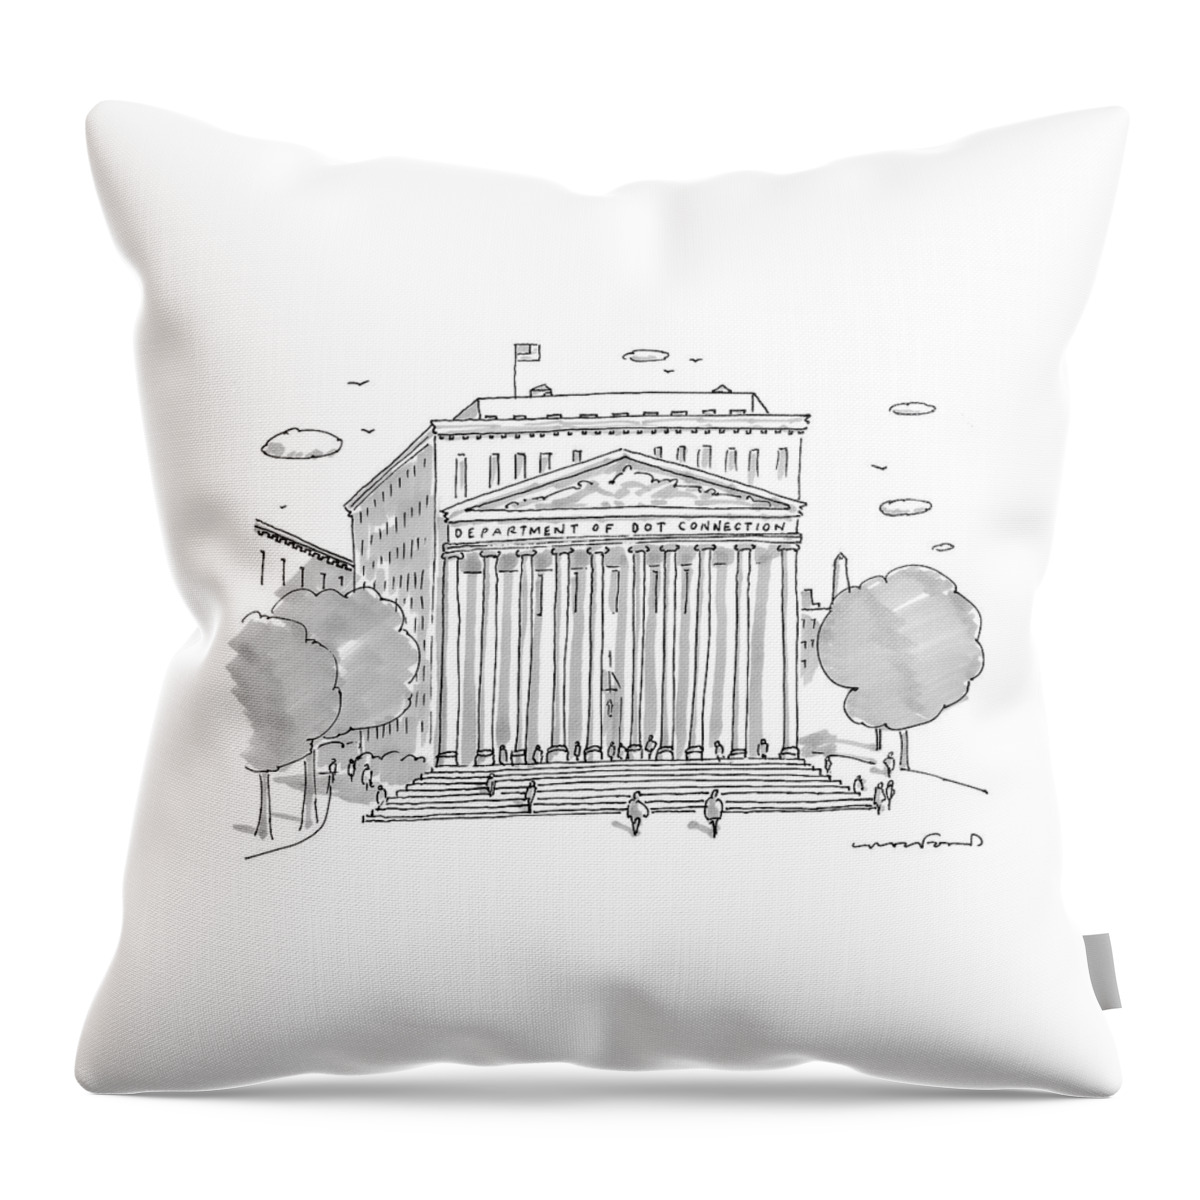 A Building In Washington Dc Is Shown Throw Pillow